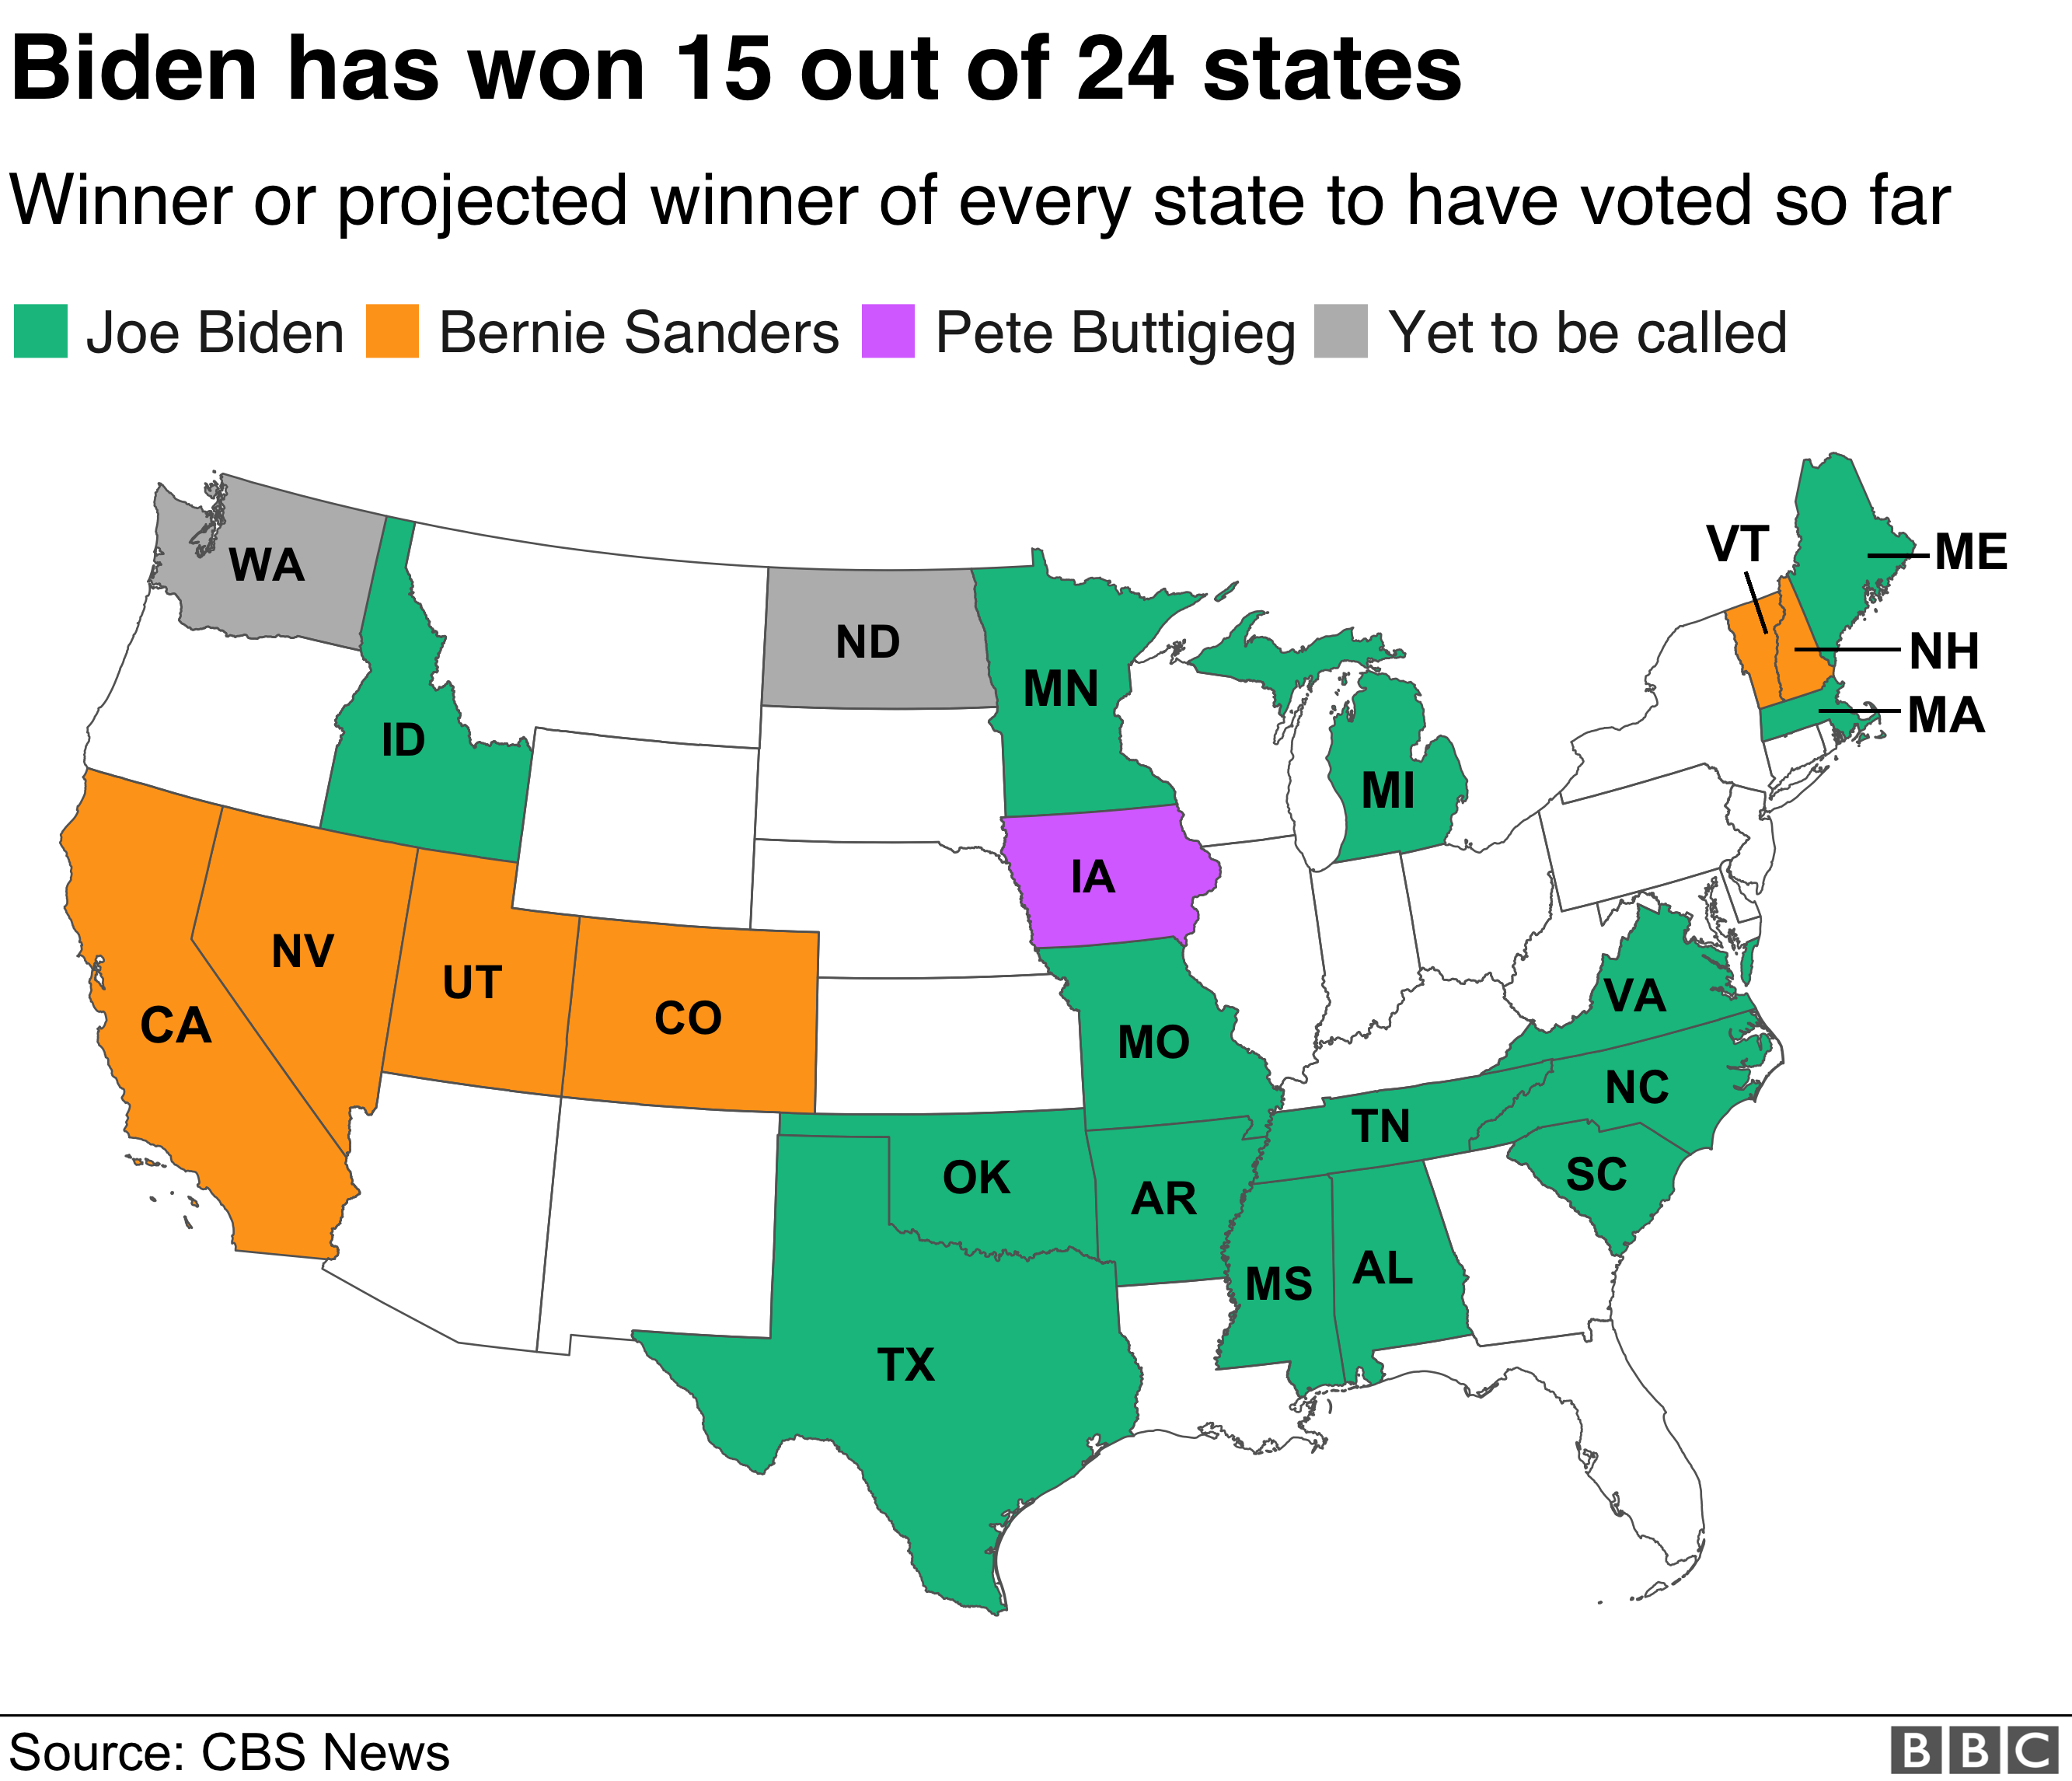 Map showing who has won each of the states that has voted so far